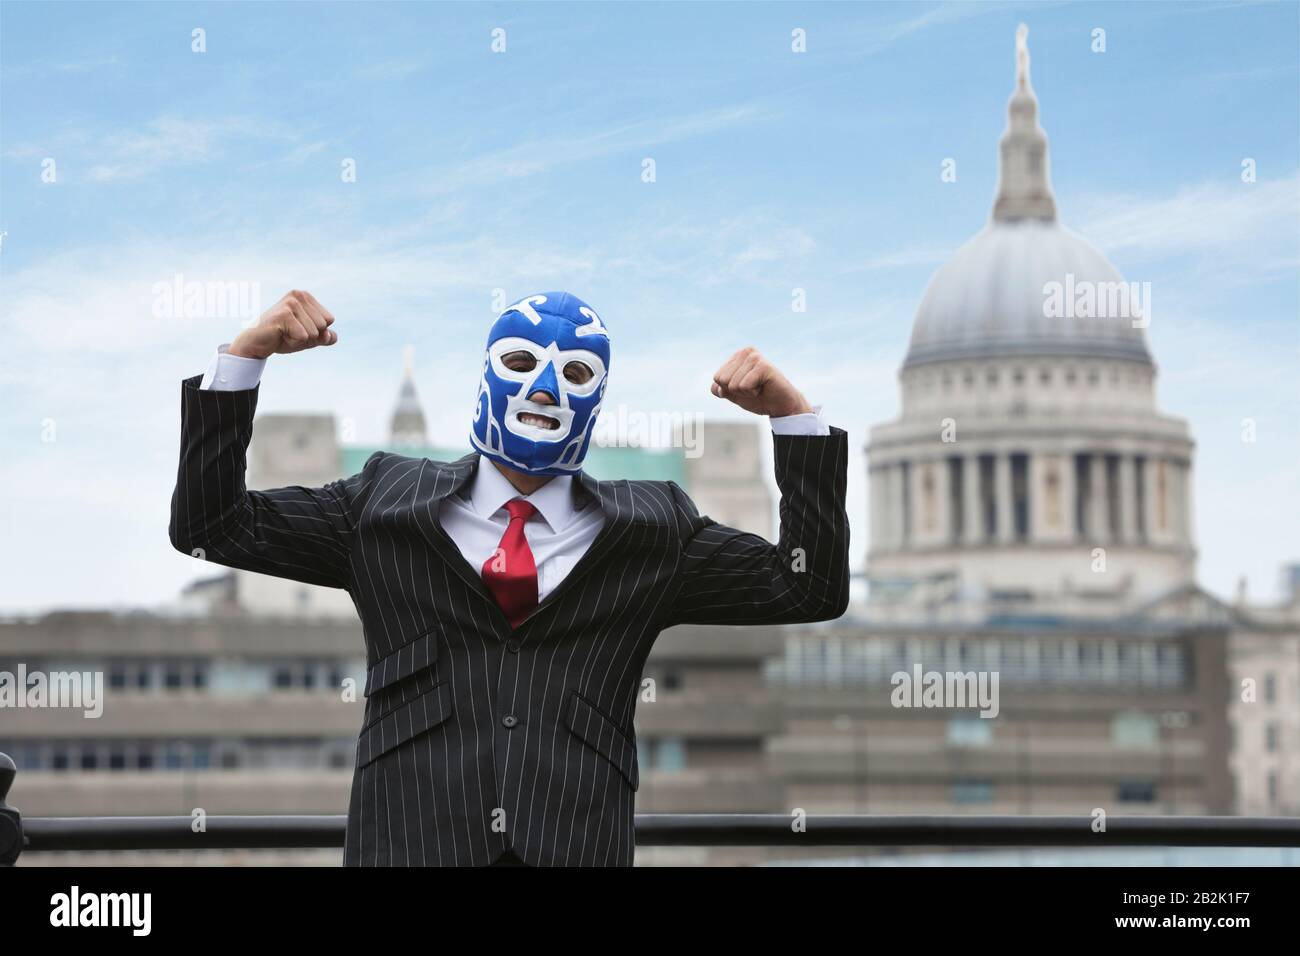 Young businessman flexing muscles while wearing wrestling mask with St. Paul's Cathedral building in the background Stock Photo